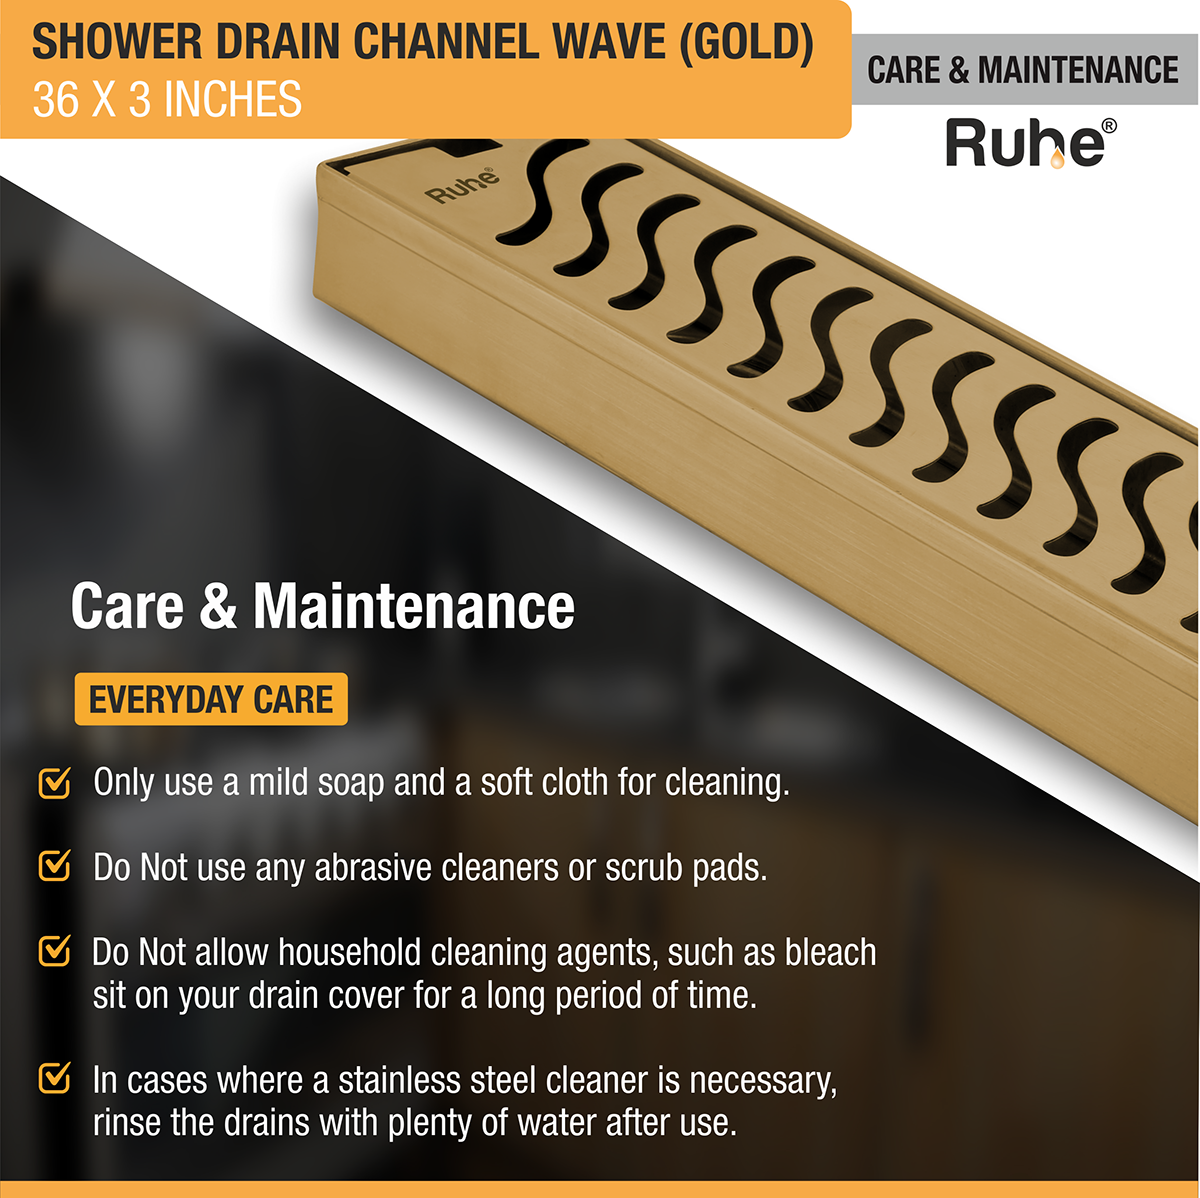 Wave Shower Drain Channel (36 x 3 Inches) YELLOW GOLD care and maintenance